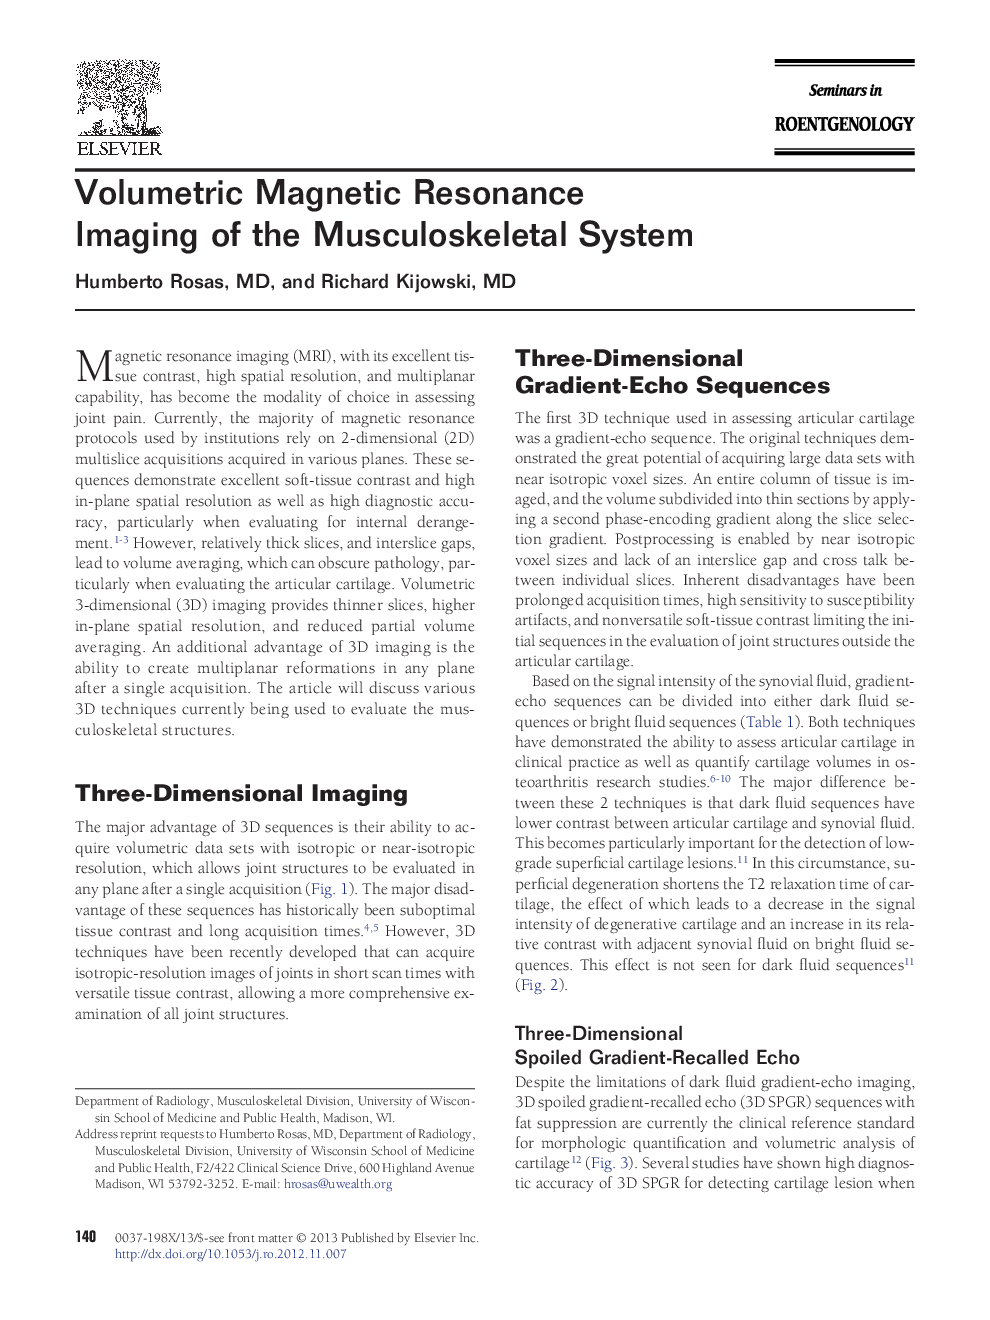 Volumetric Magnetic Resonance Imaging of the Musculoskeletal System